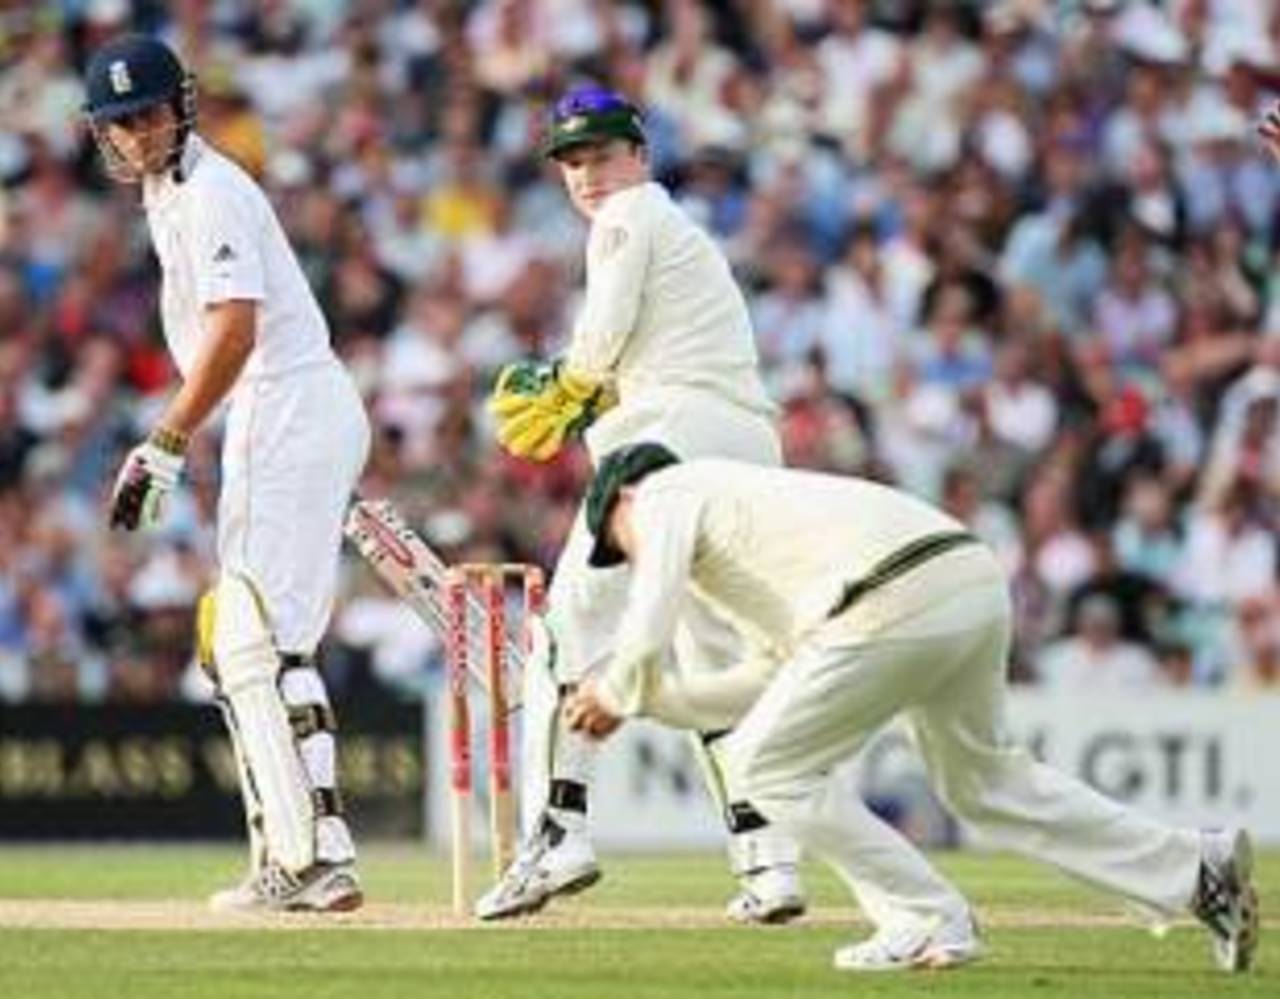 Alastair Cook ends a disappointing series with the bat as he edges to slip, England v Australia, 5th Test, The Oval, 2nd day, August 21, 2009